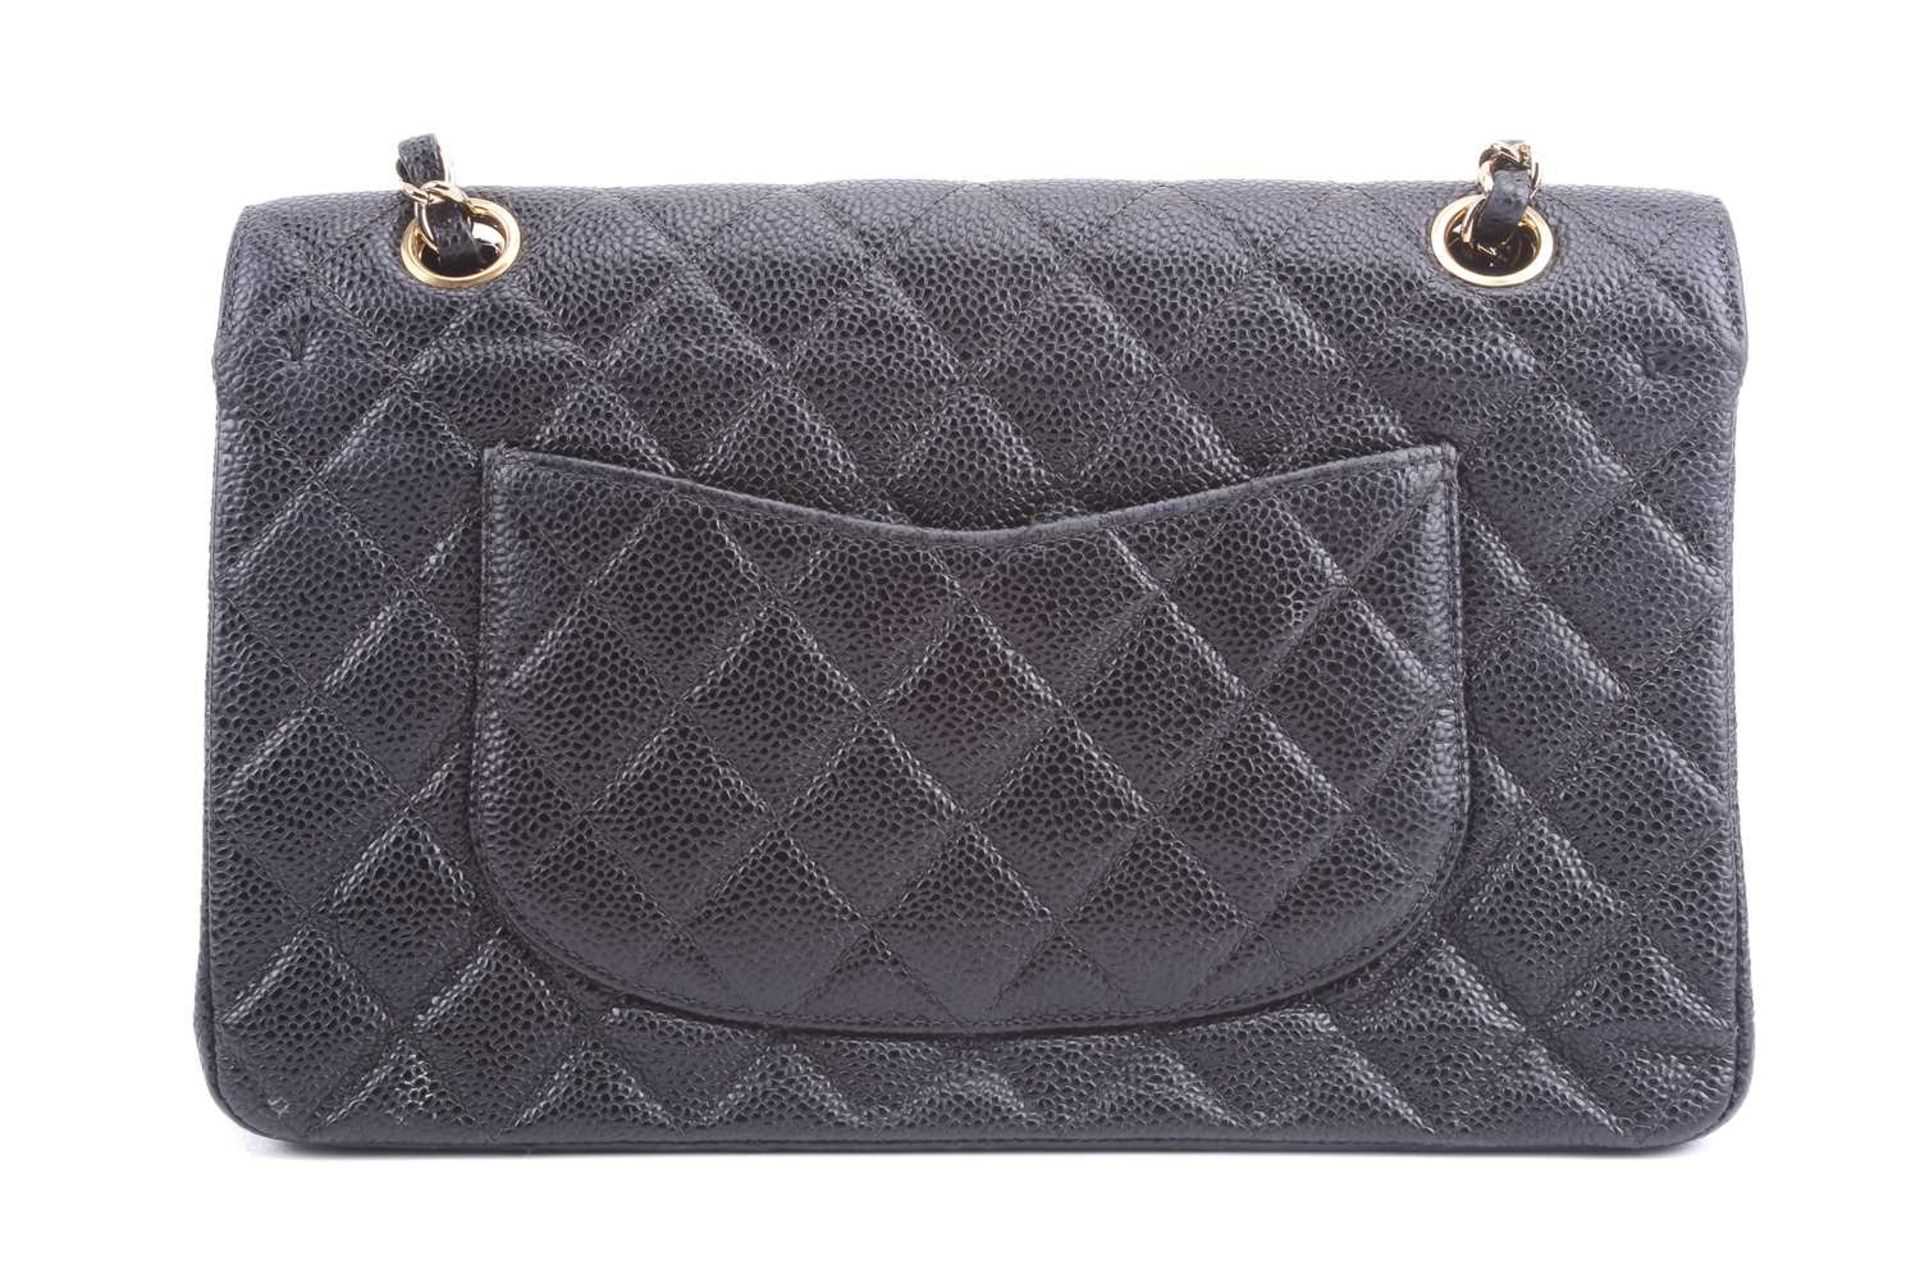 Chanel - a medium classic double flap bag in black diamond-quilted caviar leather, circa 2003, - Image 5 of 11